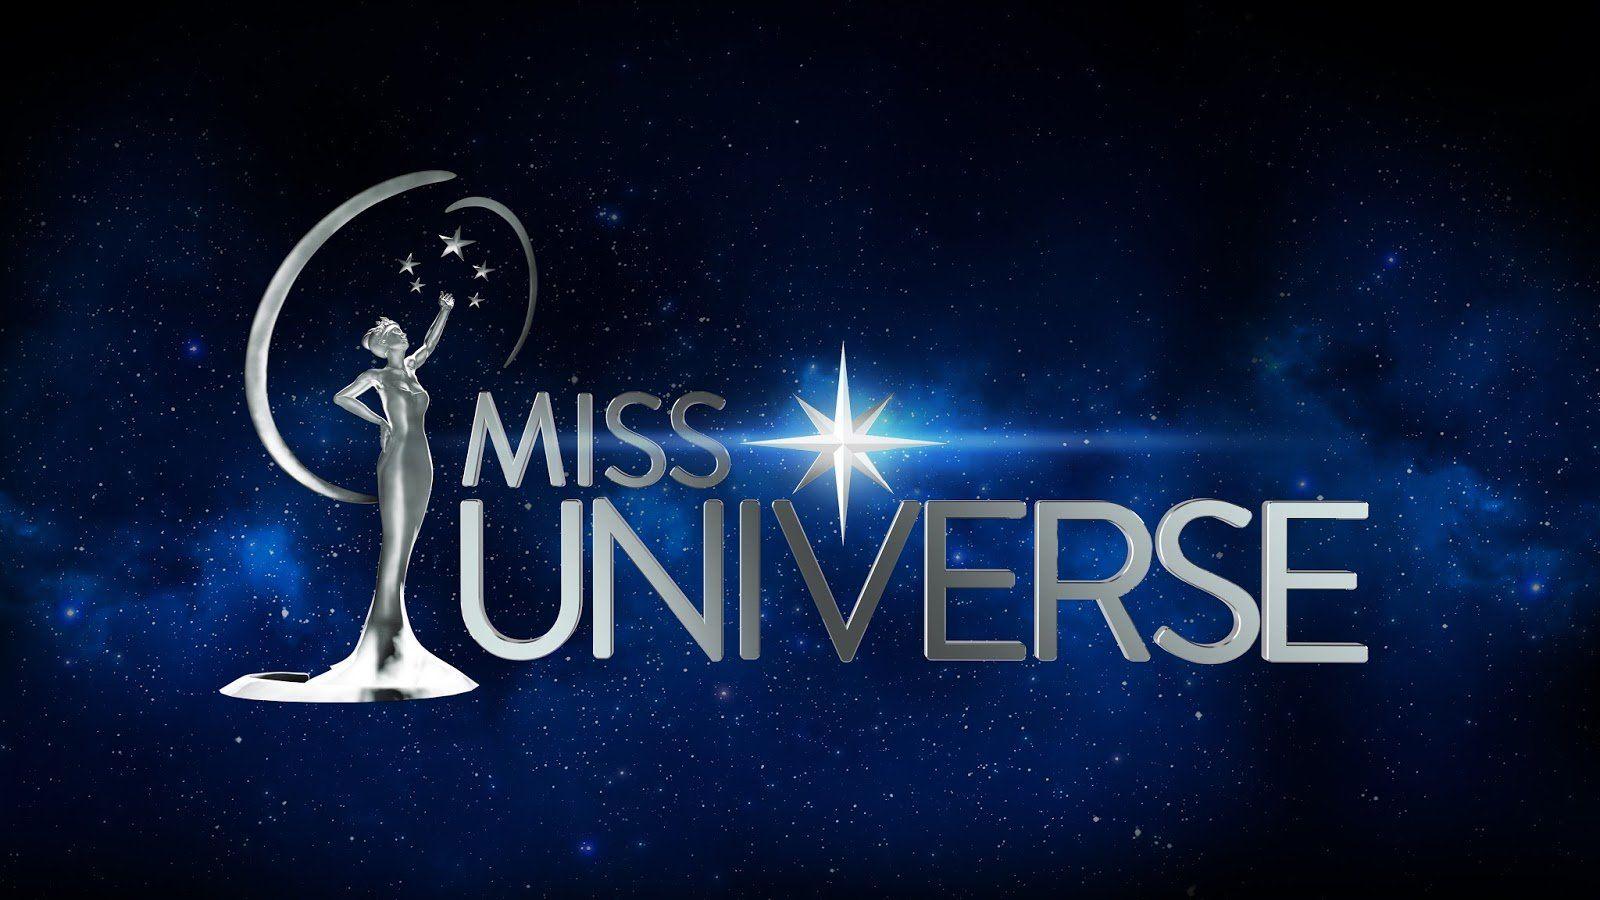 Miss Universe 2017 Wallpapers Wallpaper Cave Images, Photos, Reviews